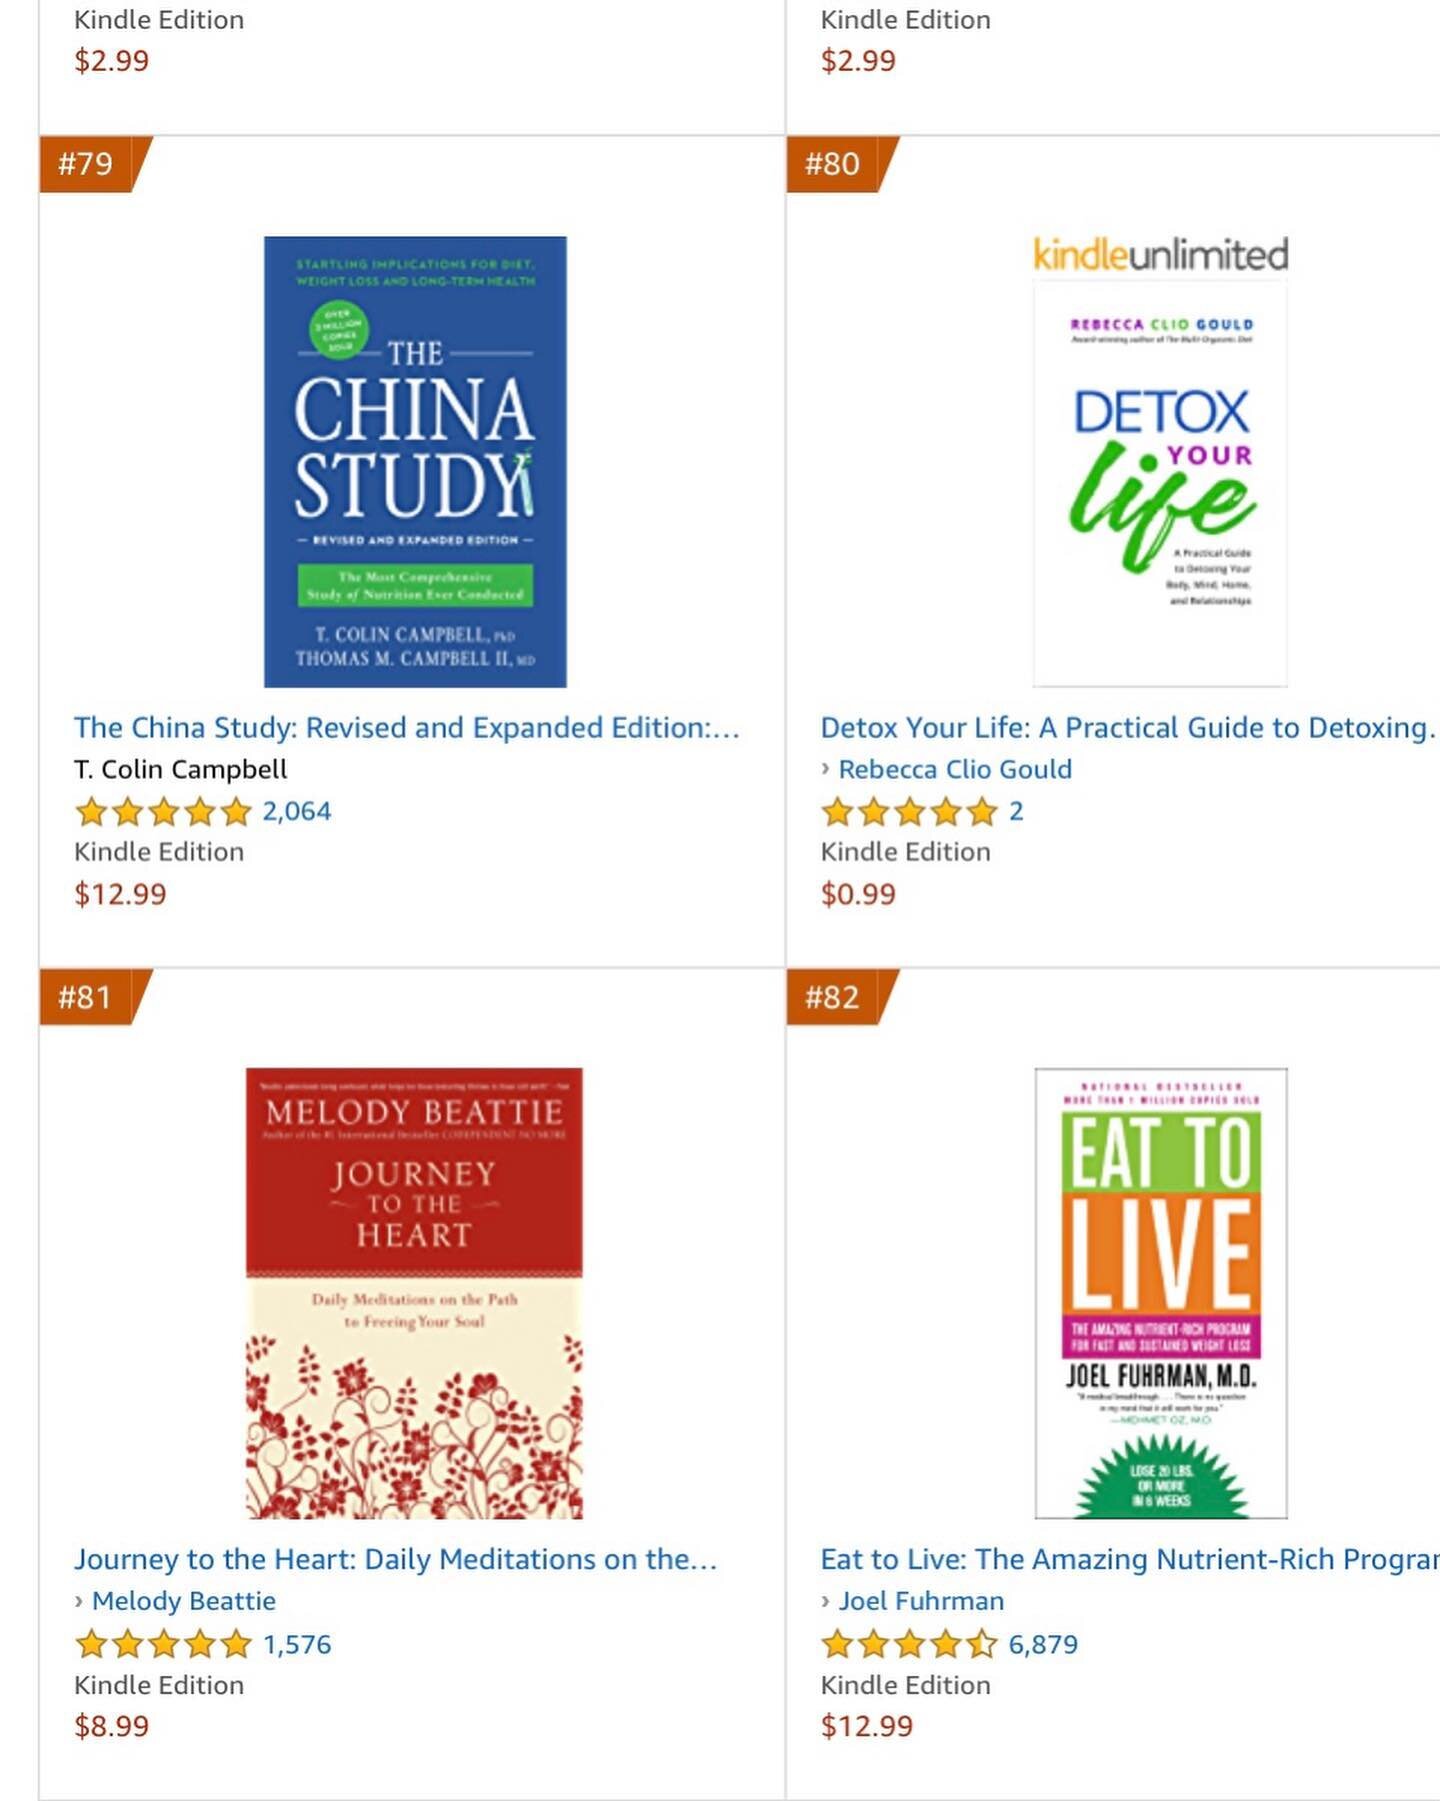 Woo hoo! Detox Your Life is on the best seller list. # 80 in the Healthy Living category on Amazon! 🥳 Honestly, when I was writing this book and publishing it, I didn&rsquo;t really care about it getting into the top 100 in any category. But it&rsqu